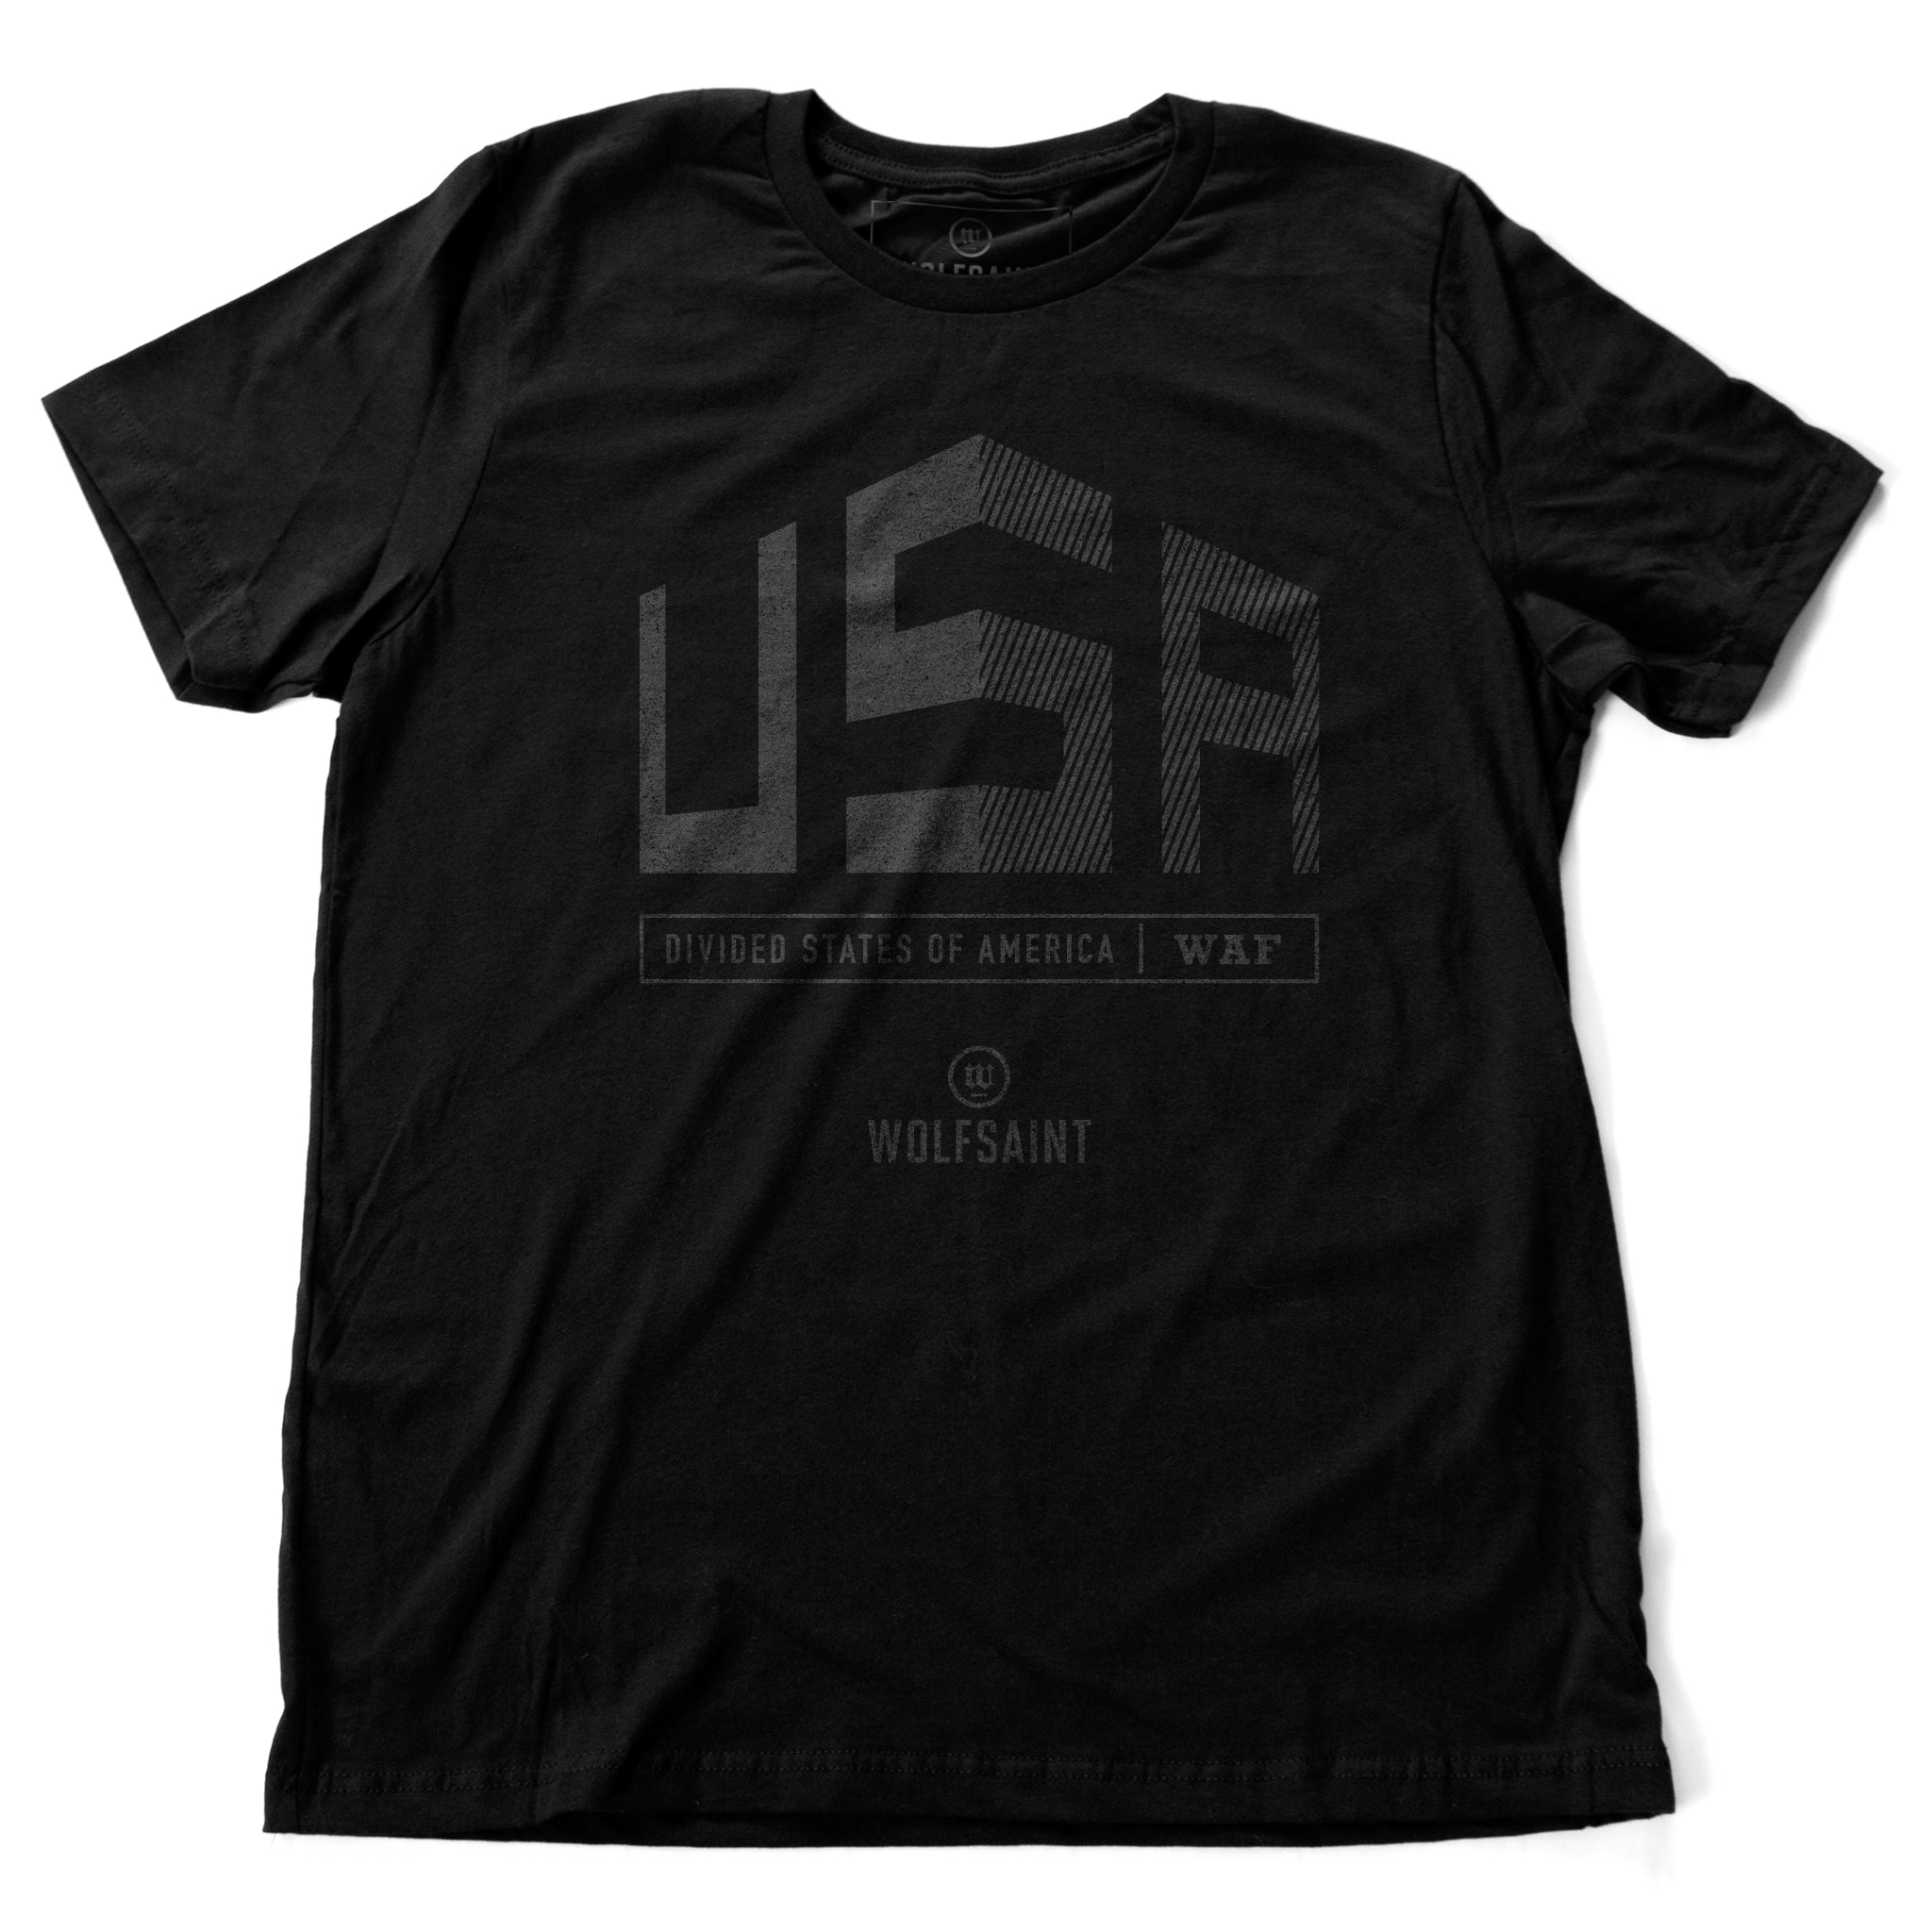 A graphic t-shirt with a divided large “USA” above the text “divided states of America” and the WOLFSAINT gothic logo. From wolfsaint.net